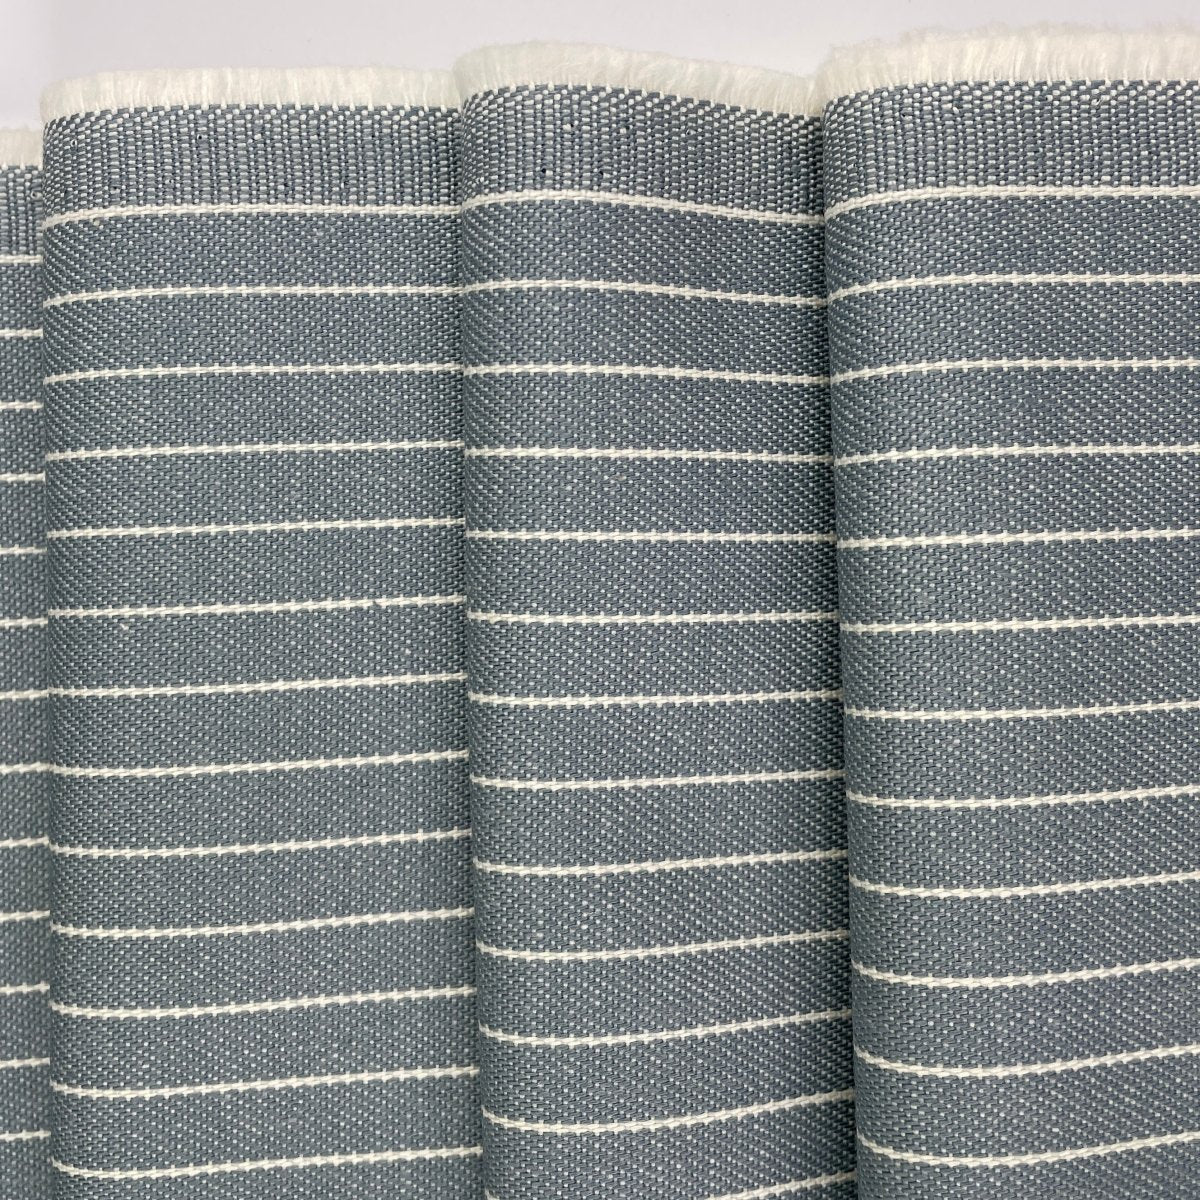 100% Cotton Yarn Dyed Dobby - Blue With White Pinstripe